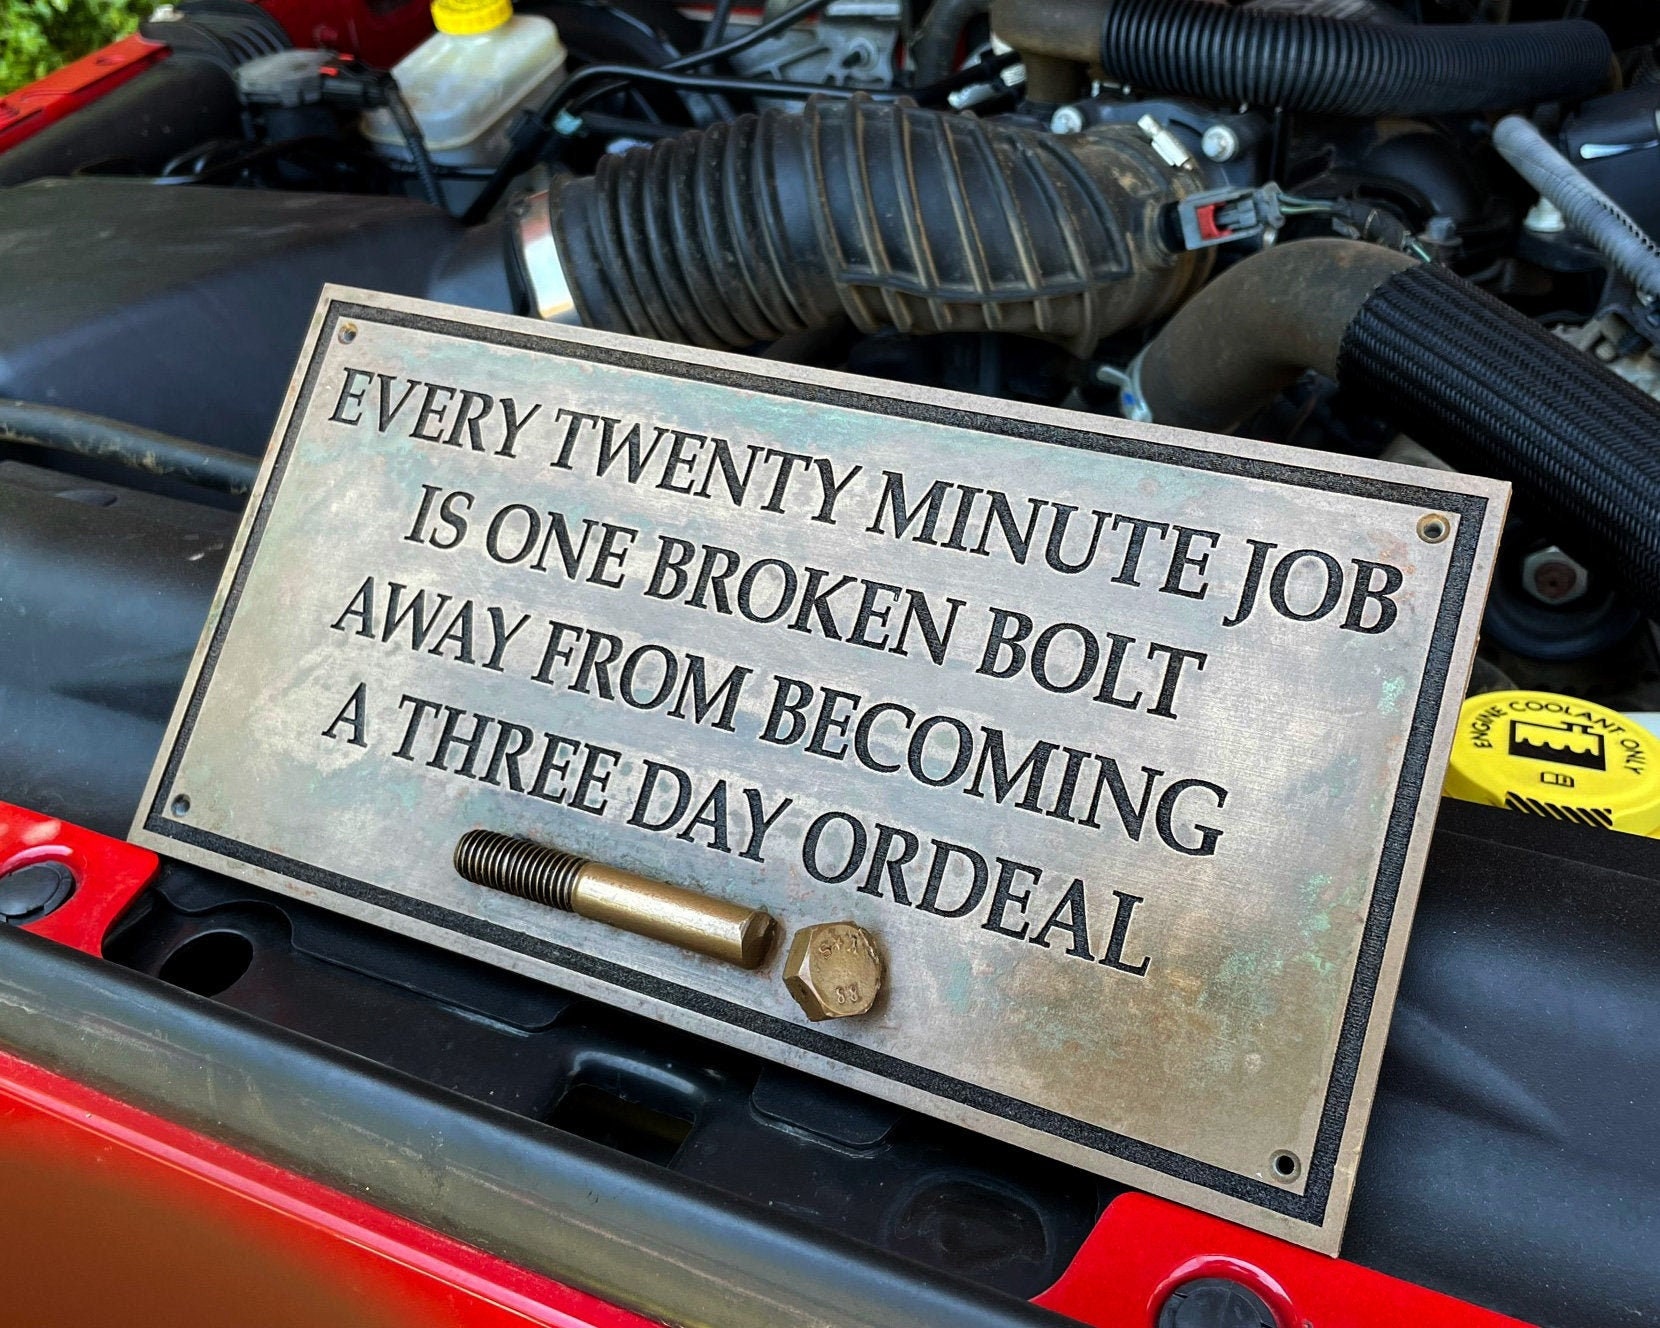 Every Twenty Minute Job is One Broken Bolt Away From Becoming 